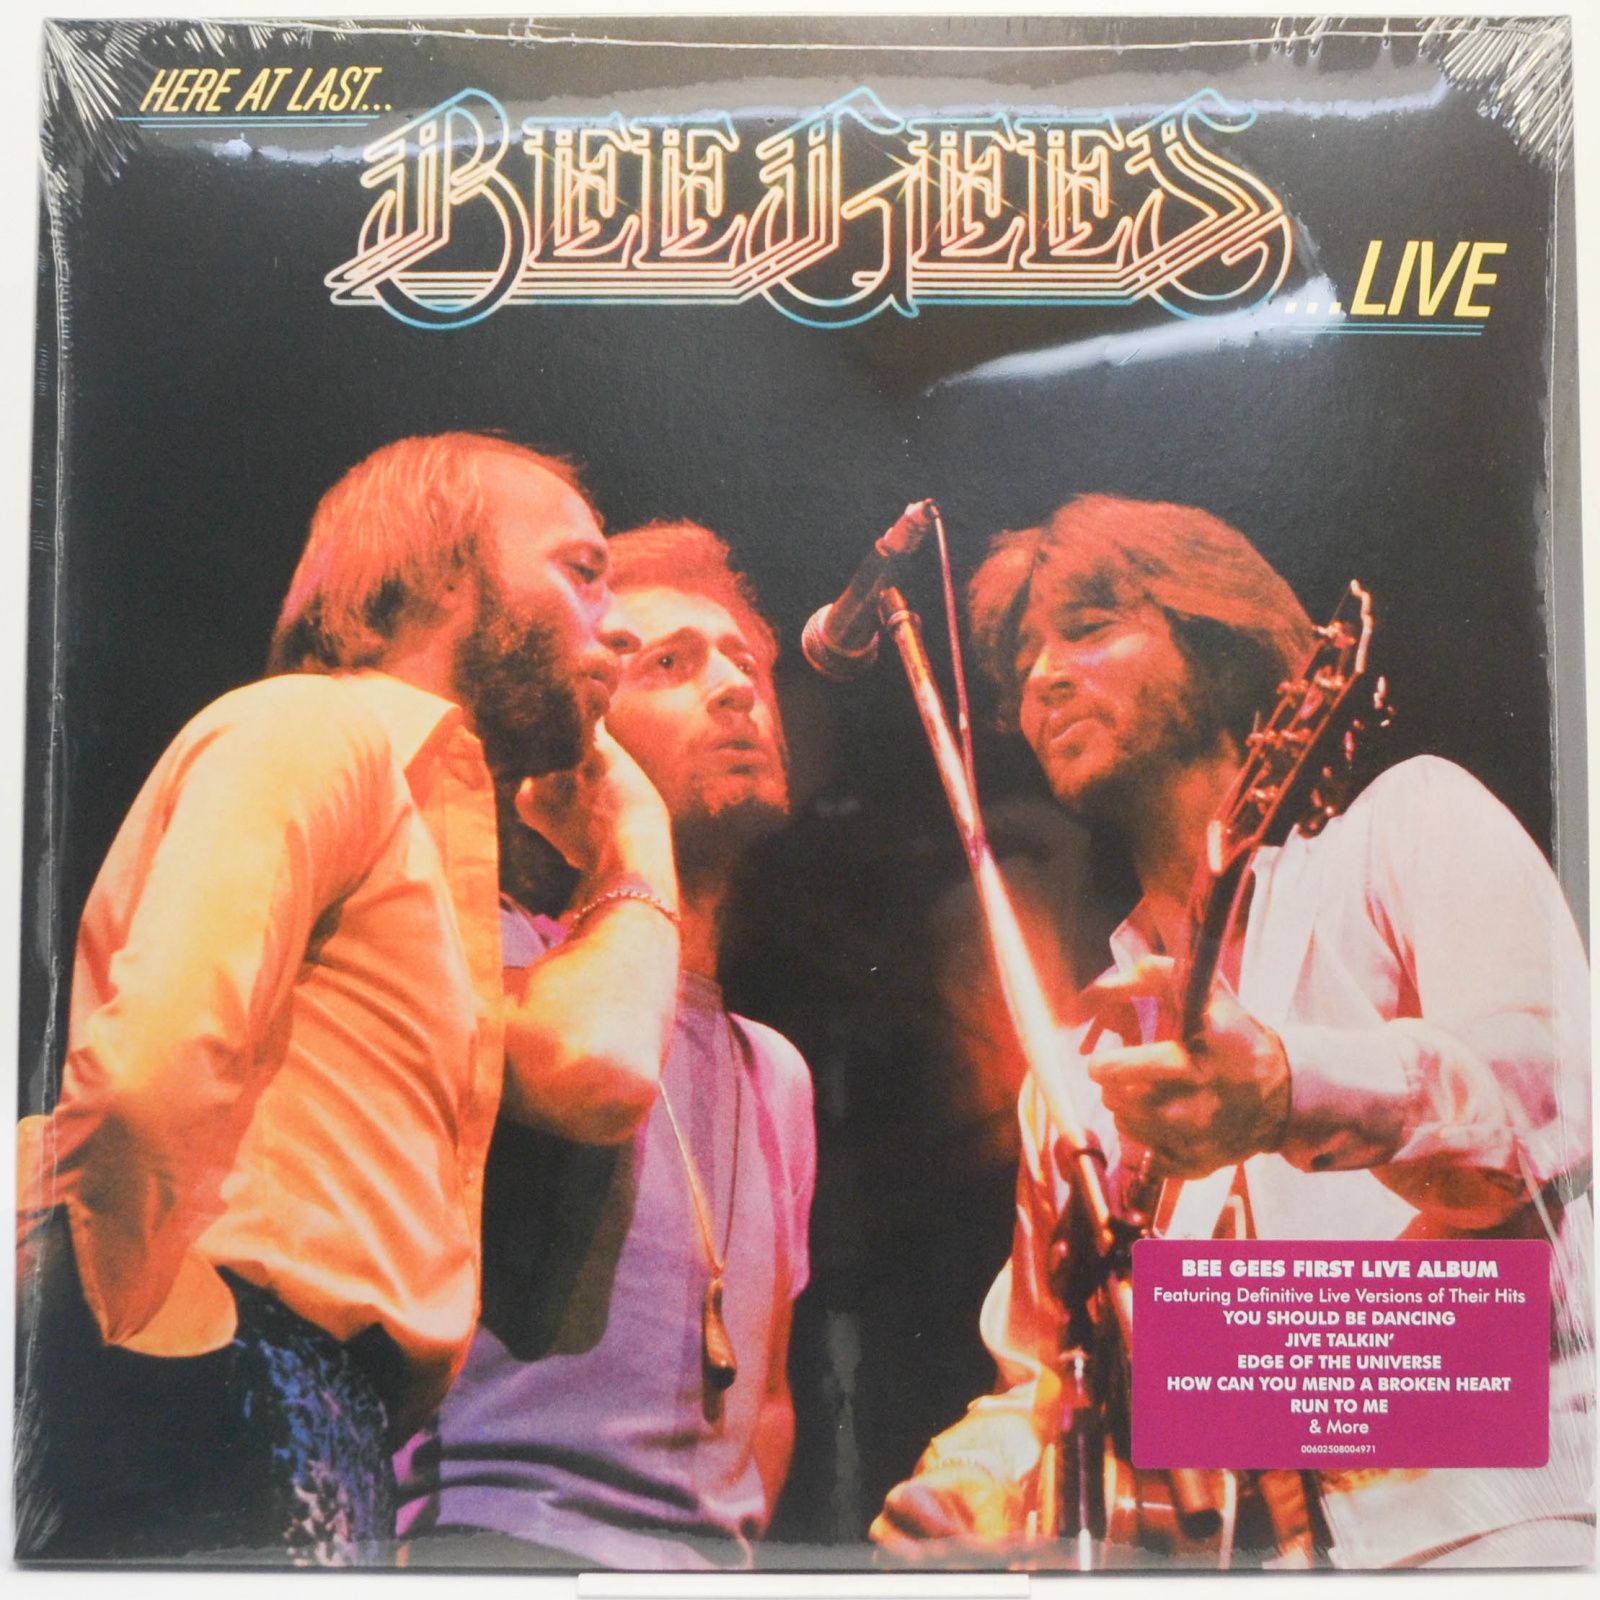 Here At Last - Bee Gees Live (2LP), 1977